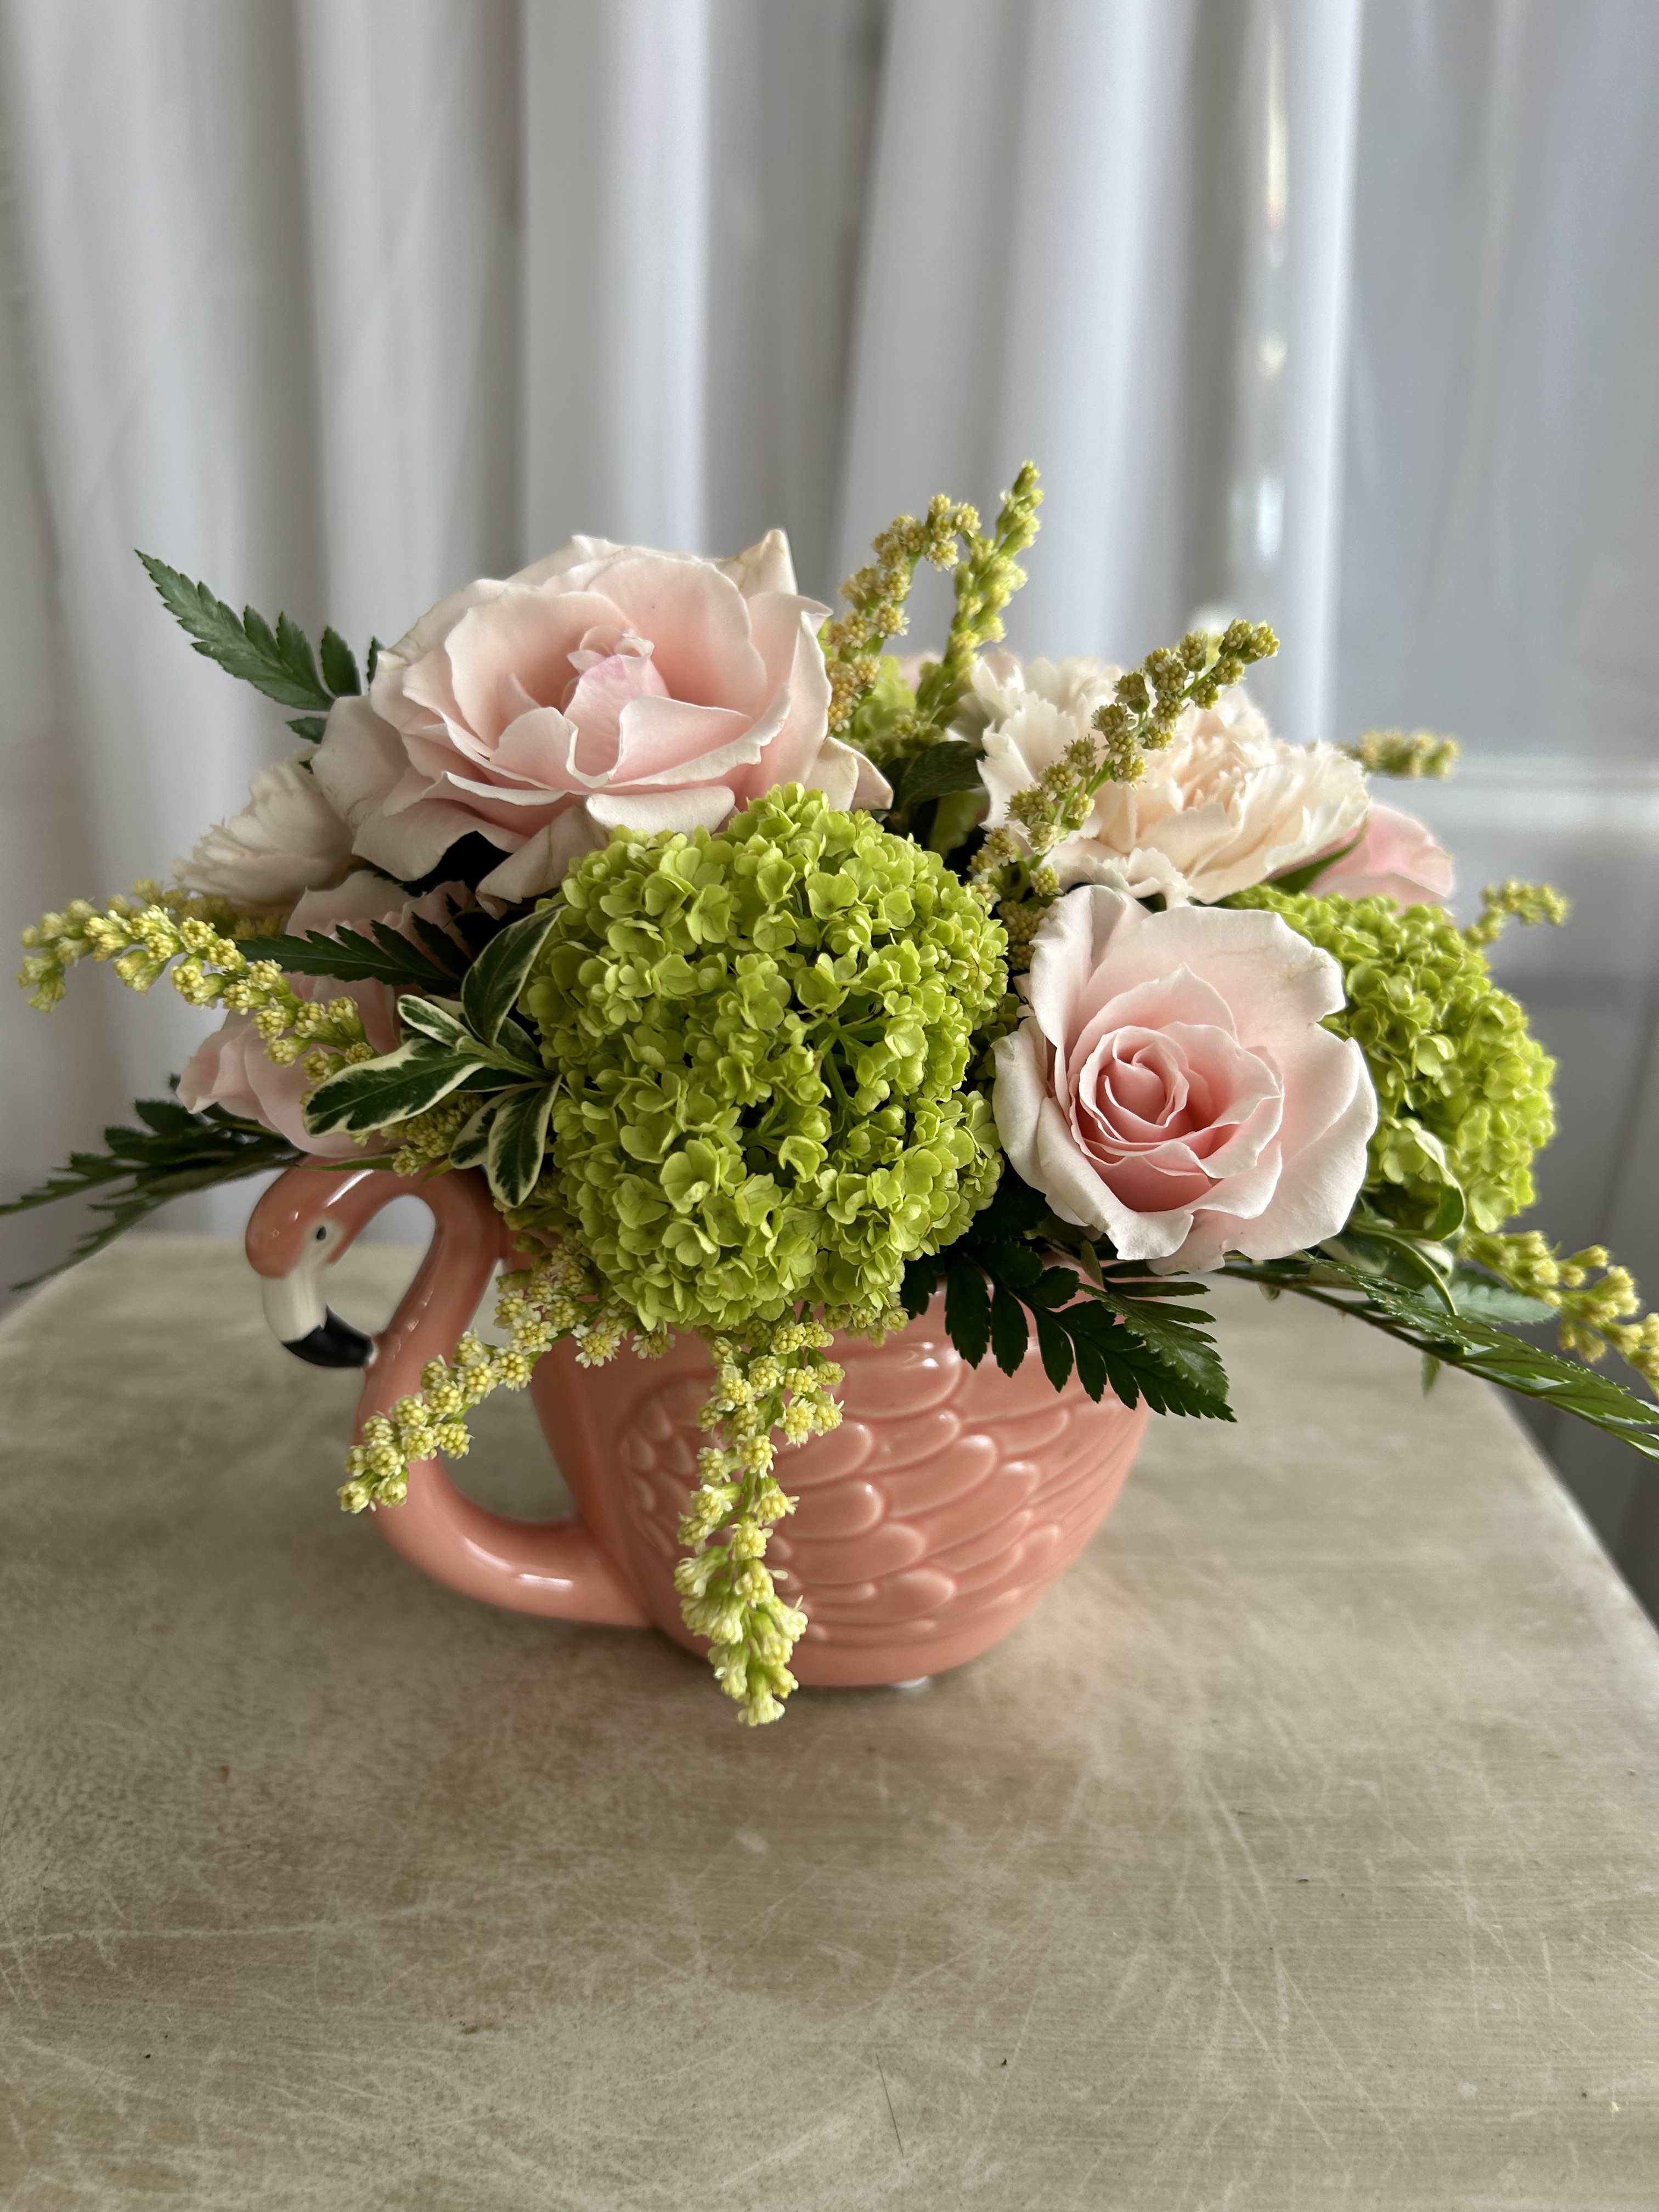 Flamingo Teacup - This flamingo teacup arrangement could be the perfect arrangement for your mother, or another special someone in your life. The standard size features pale yellows, pinks, and greens. As always. this design is subject to substitution based on what is in stock.